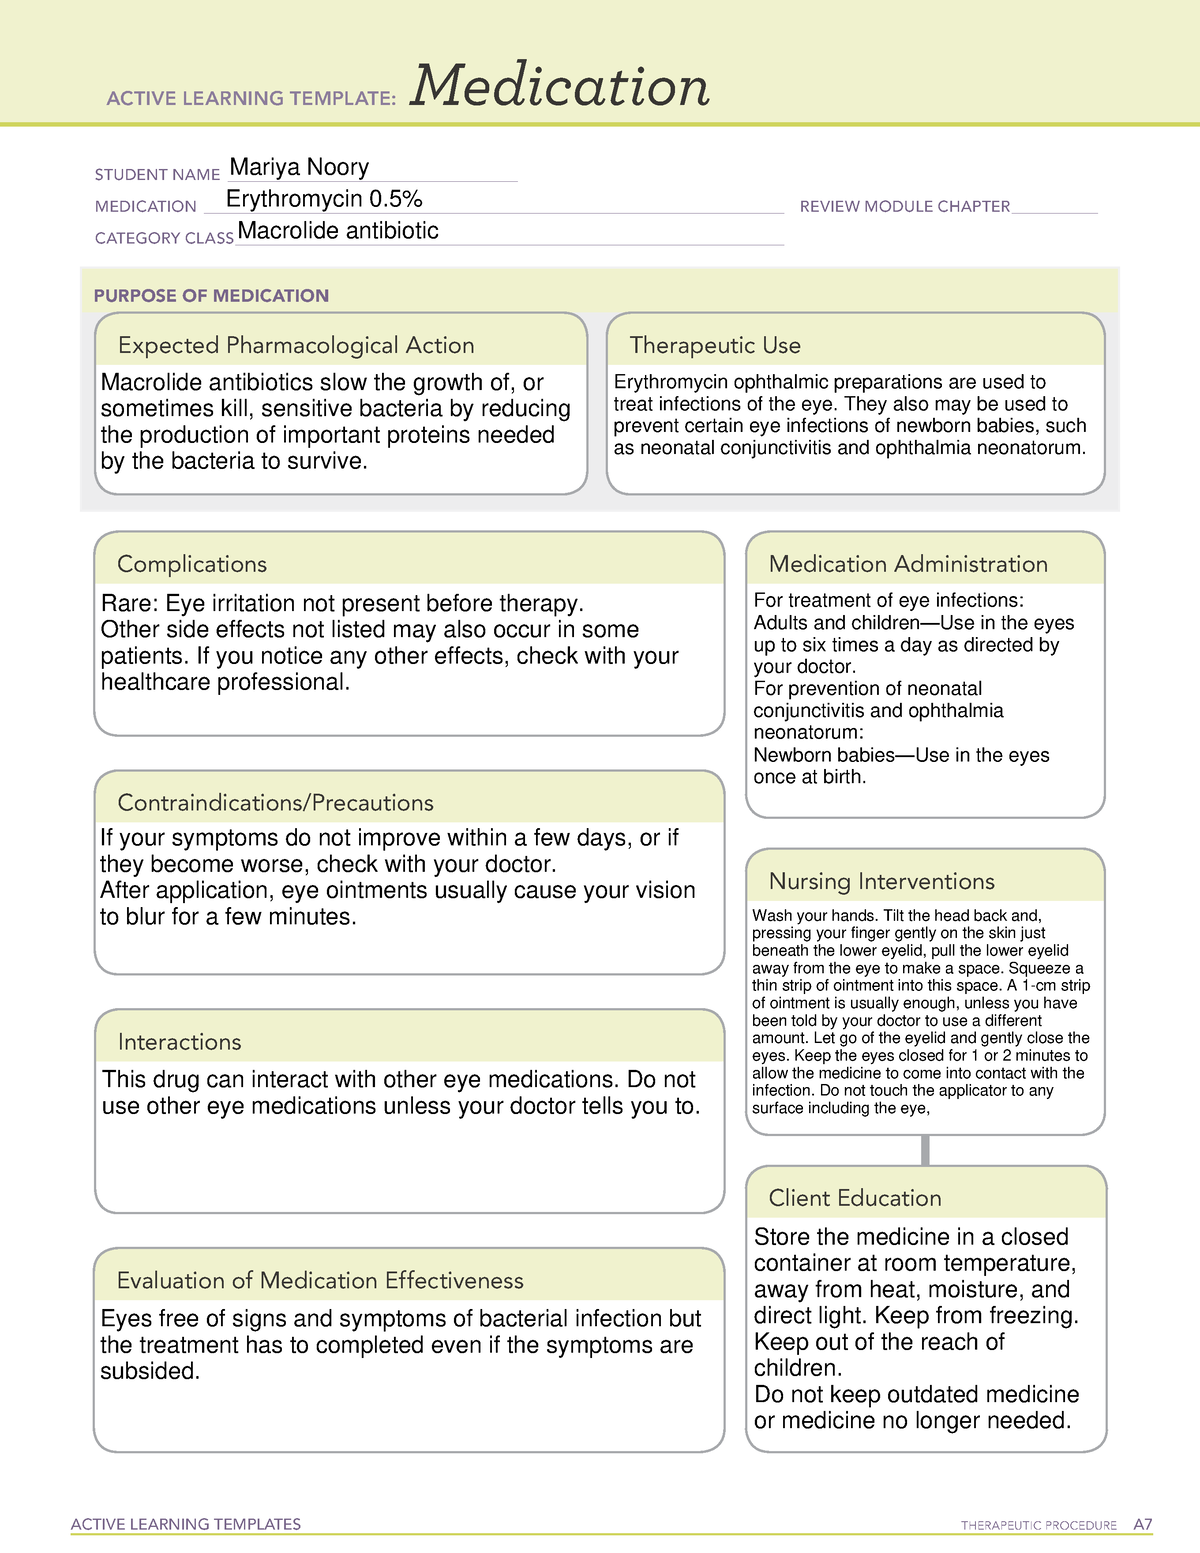 active-learning-template-medication-erythromycin-0-active-learning-templates-therapeutic